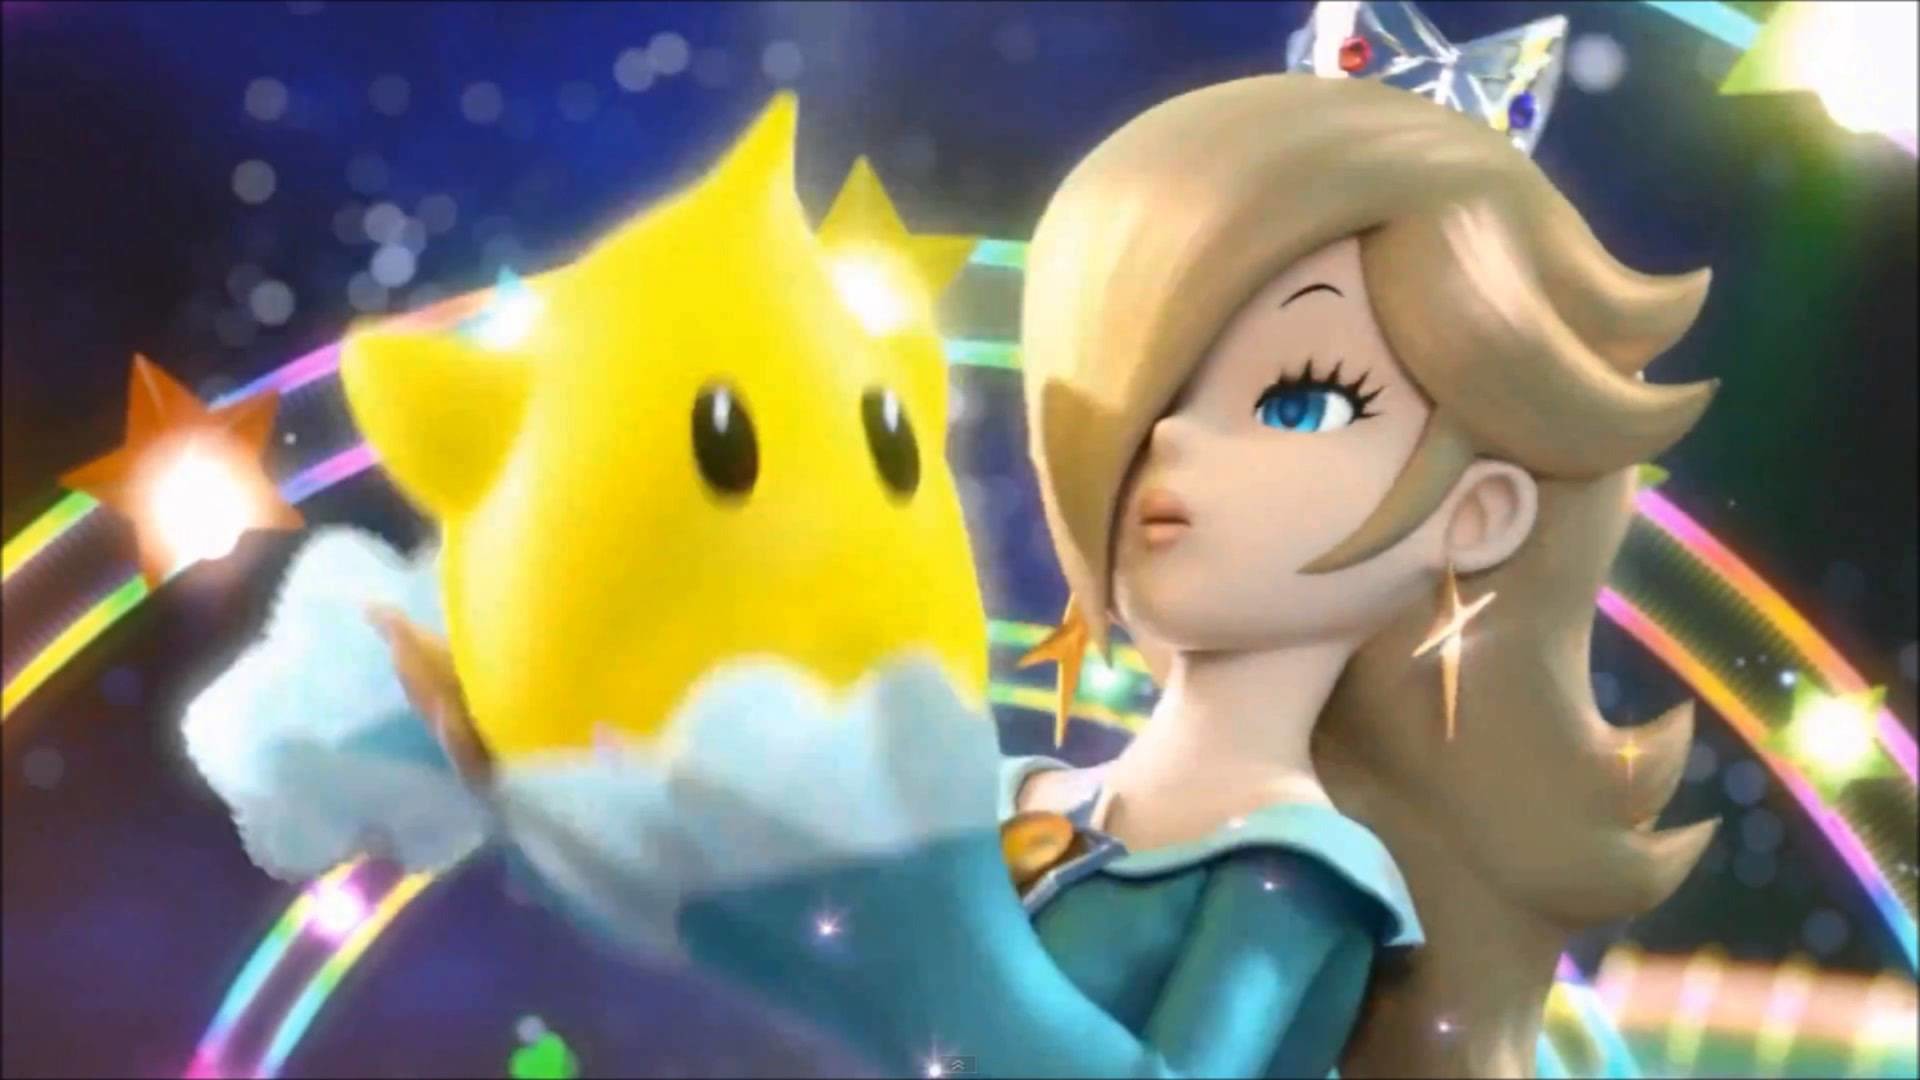 1920x1080 Thoughts on Rosalina Smash Wii U/3DS Reveal